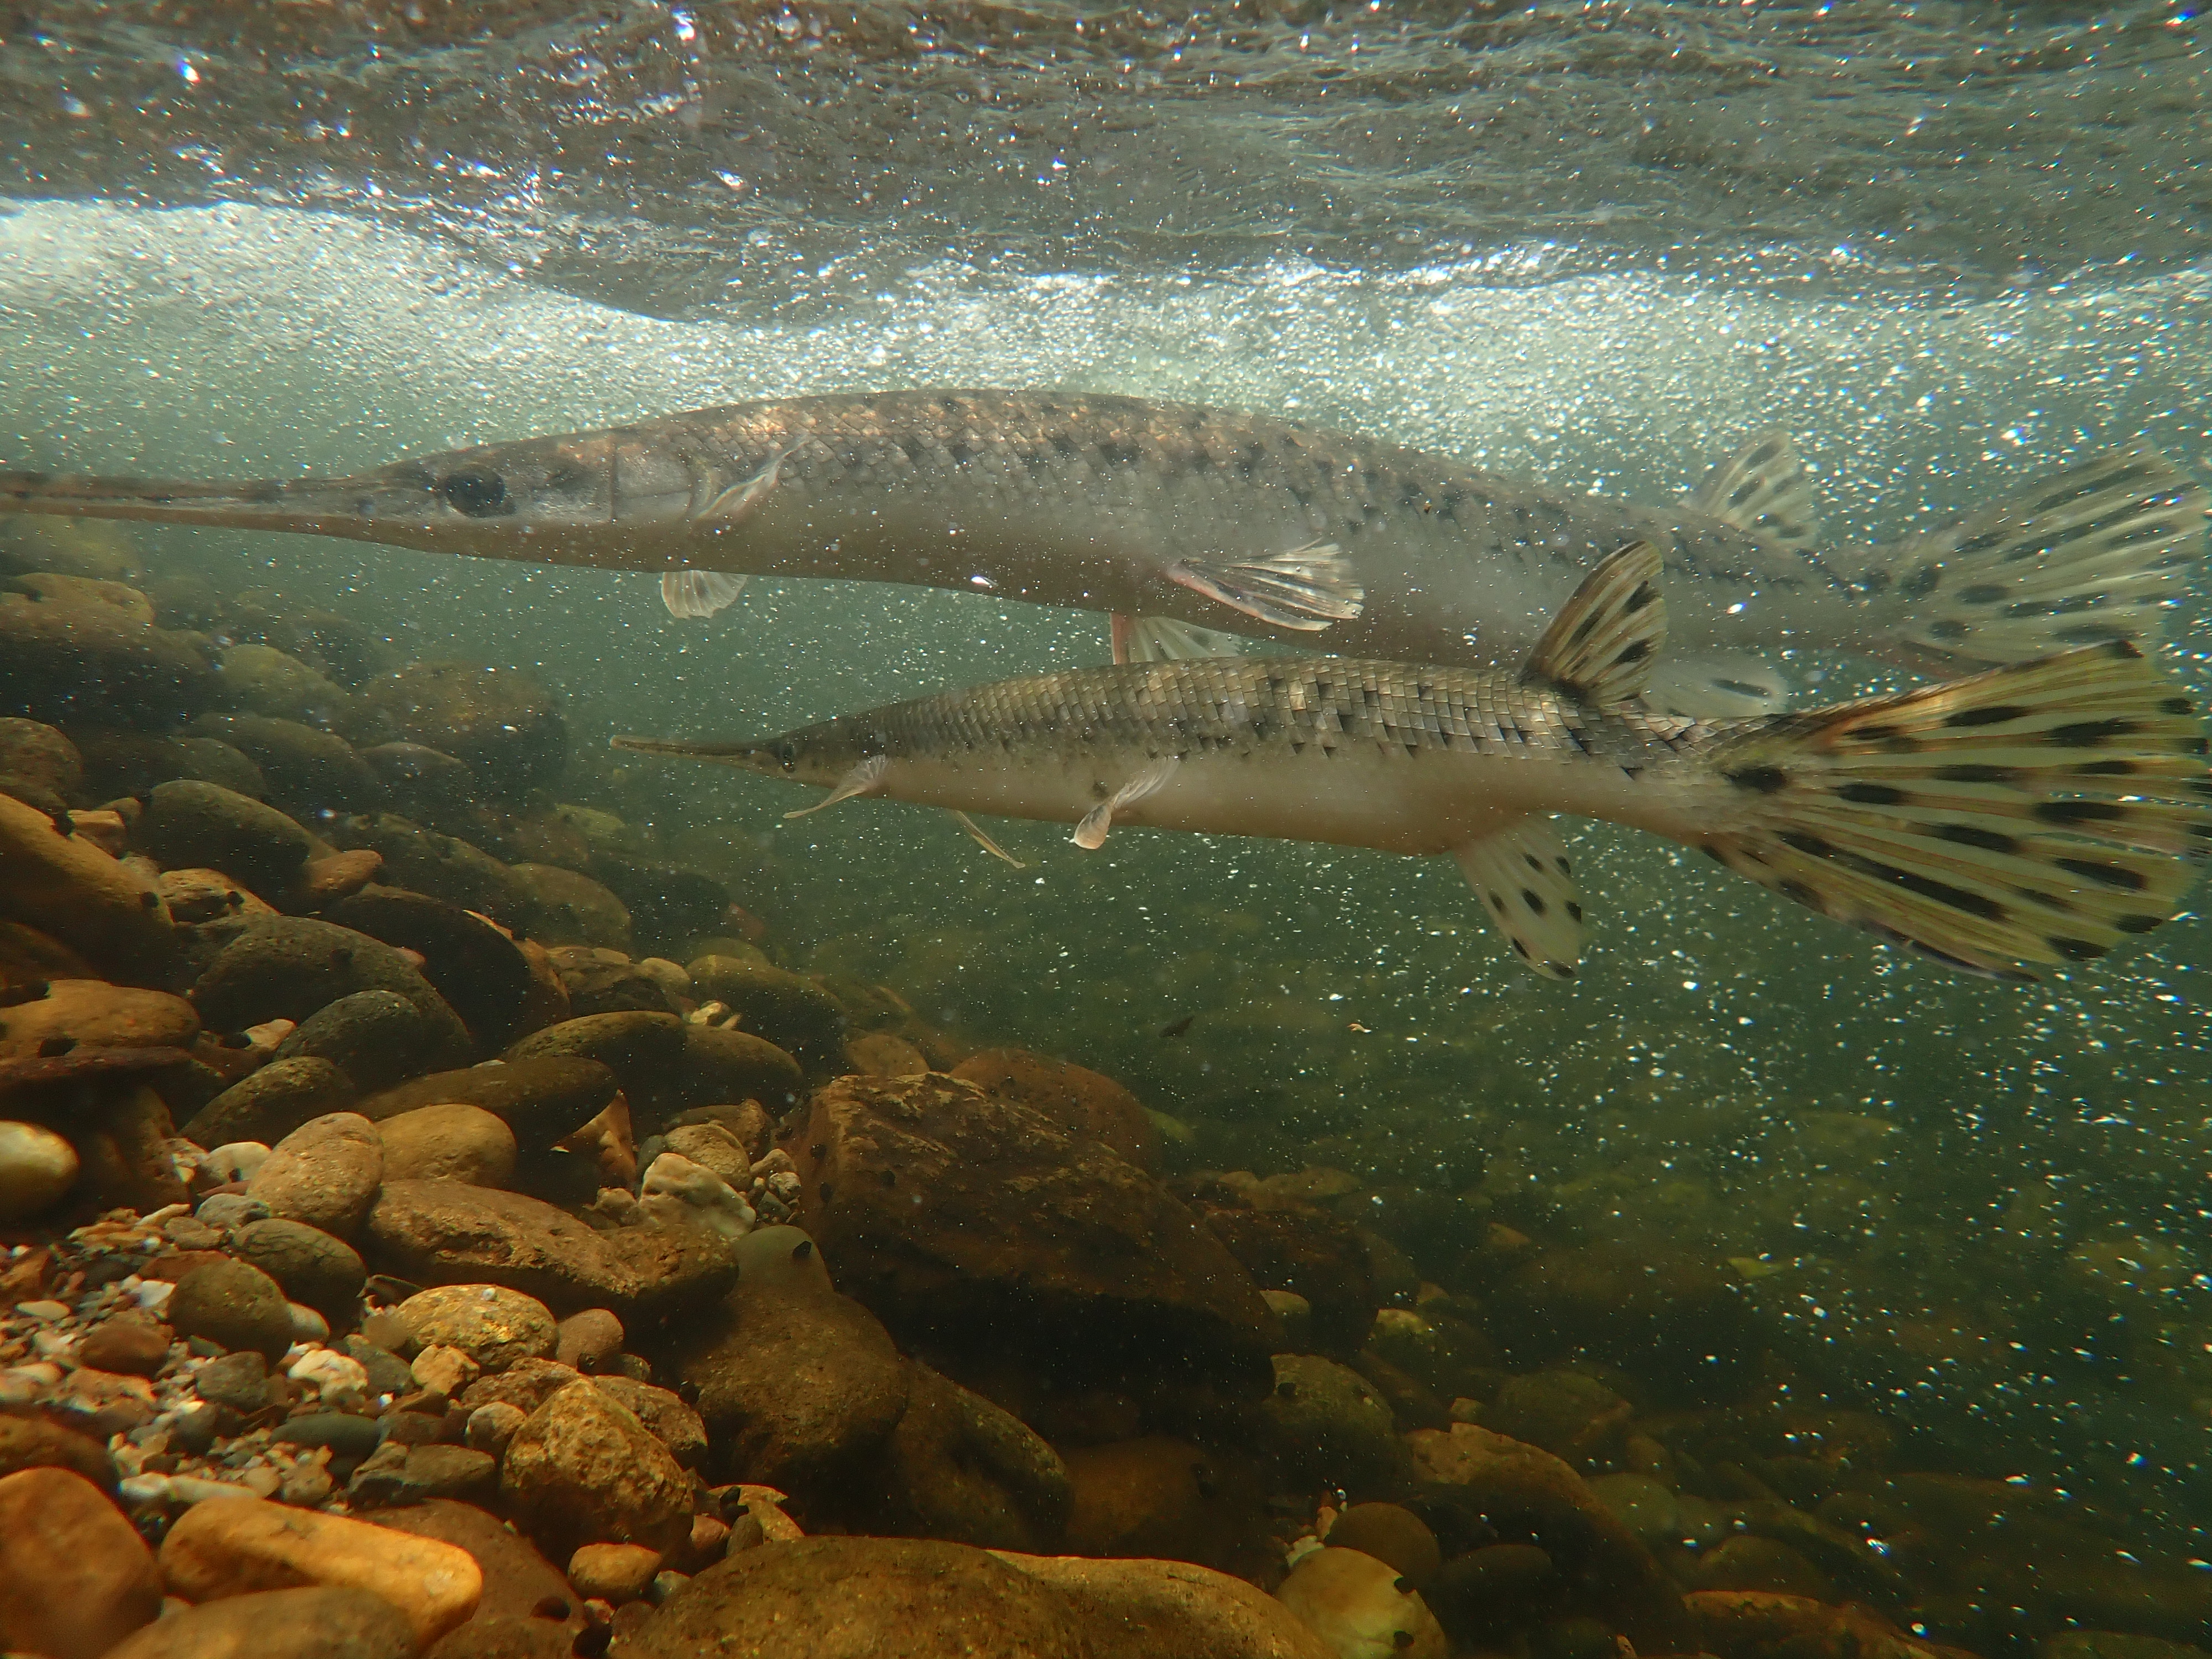 Two long-bodied fish swimming in a river